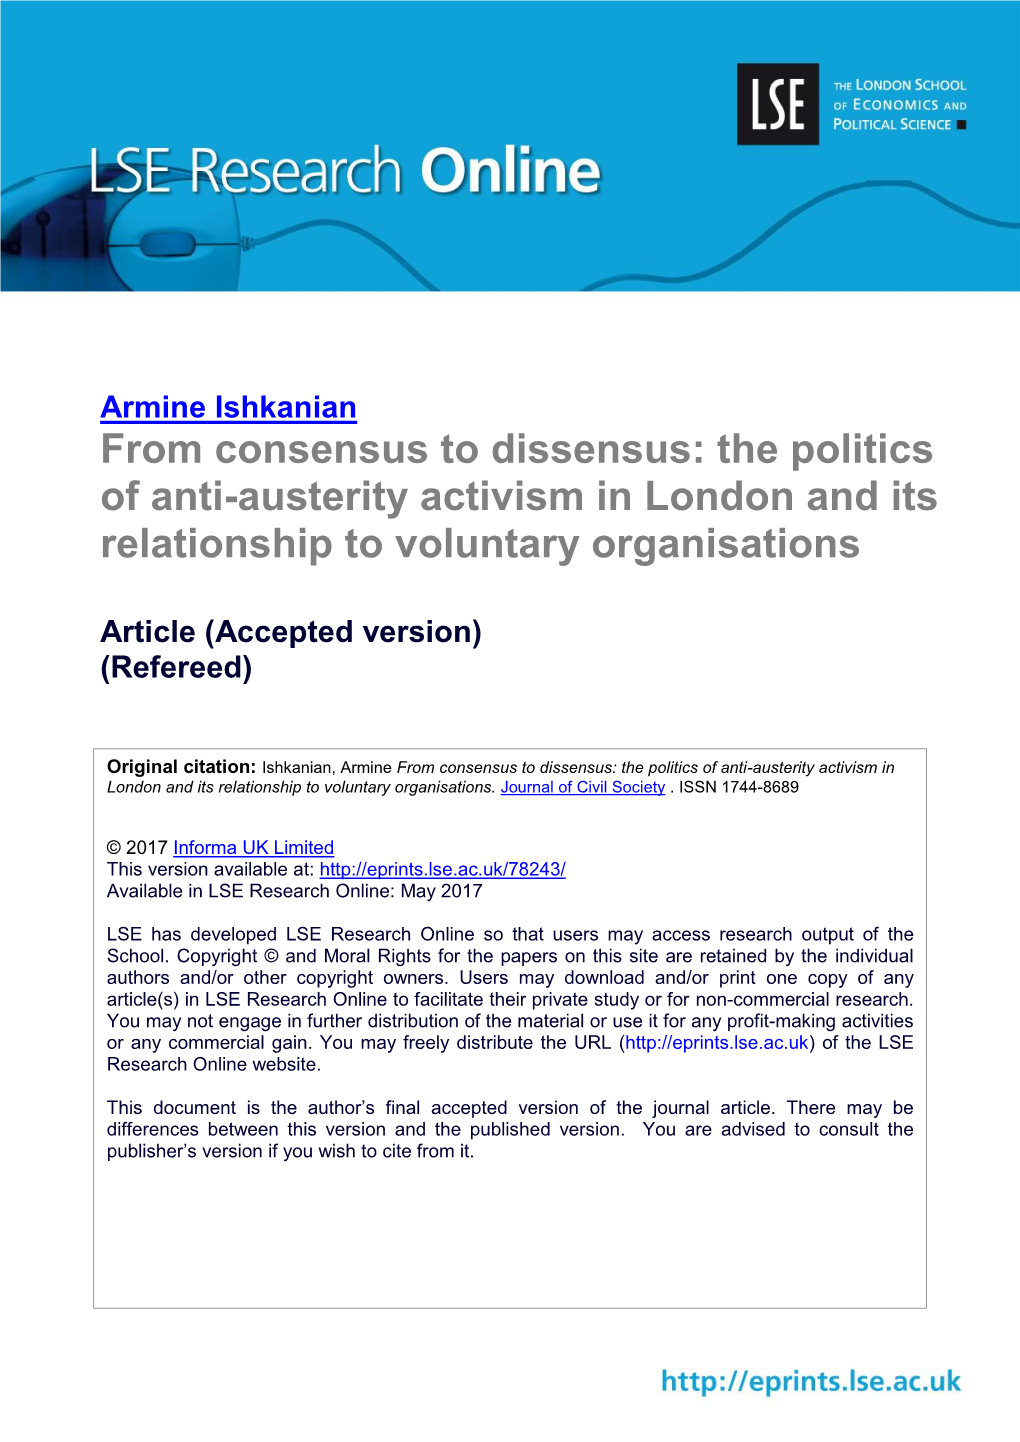 From Consensus to Dissensus: the Politics of Anti-Austerity Activism in London and Its Relationship to Voluntary Organisations